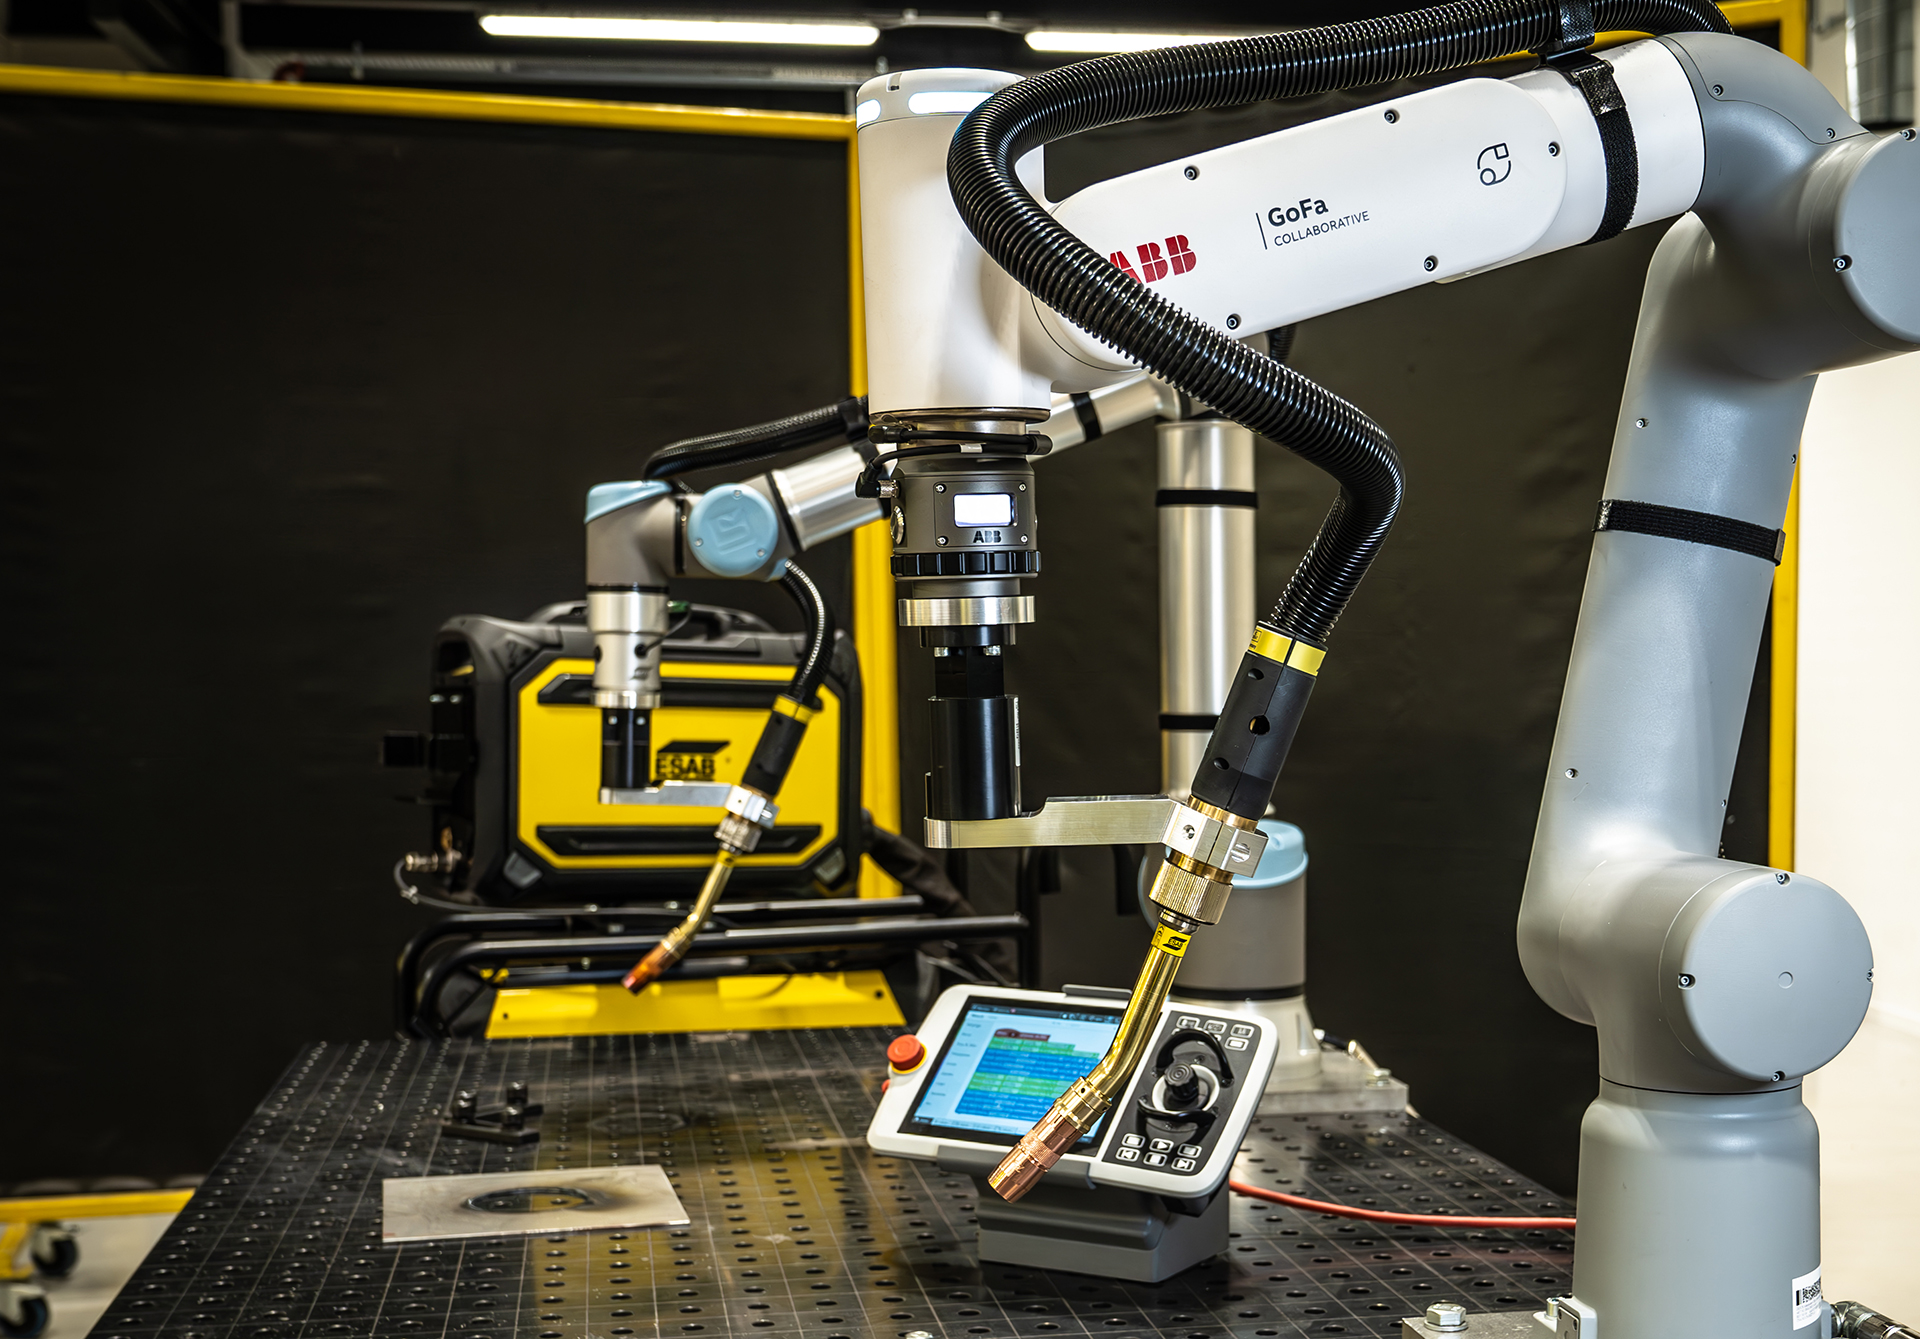 Example of cobot welding systems